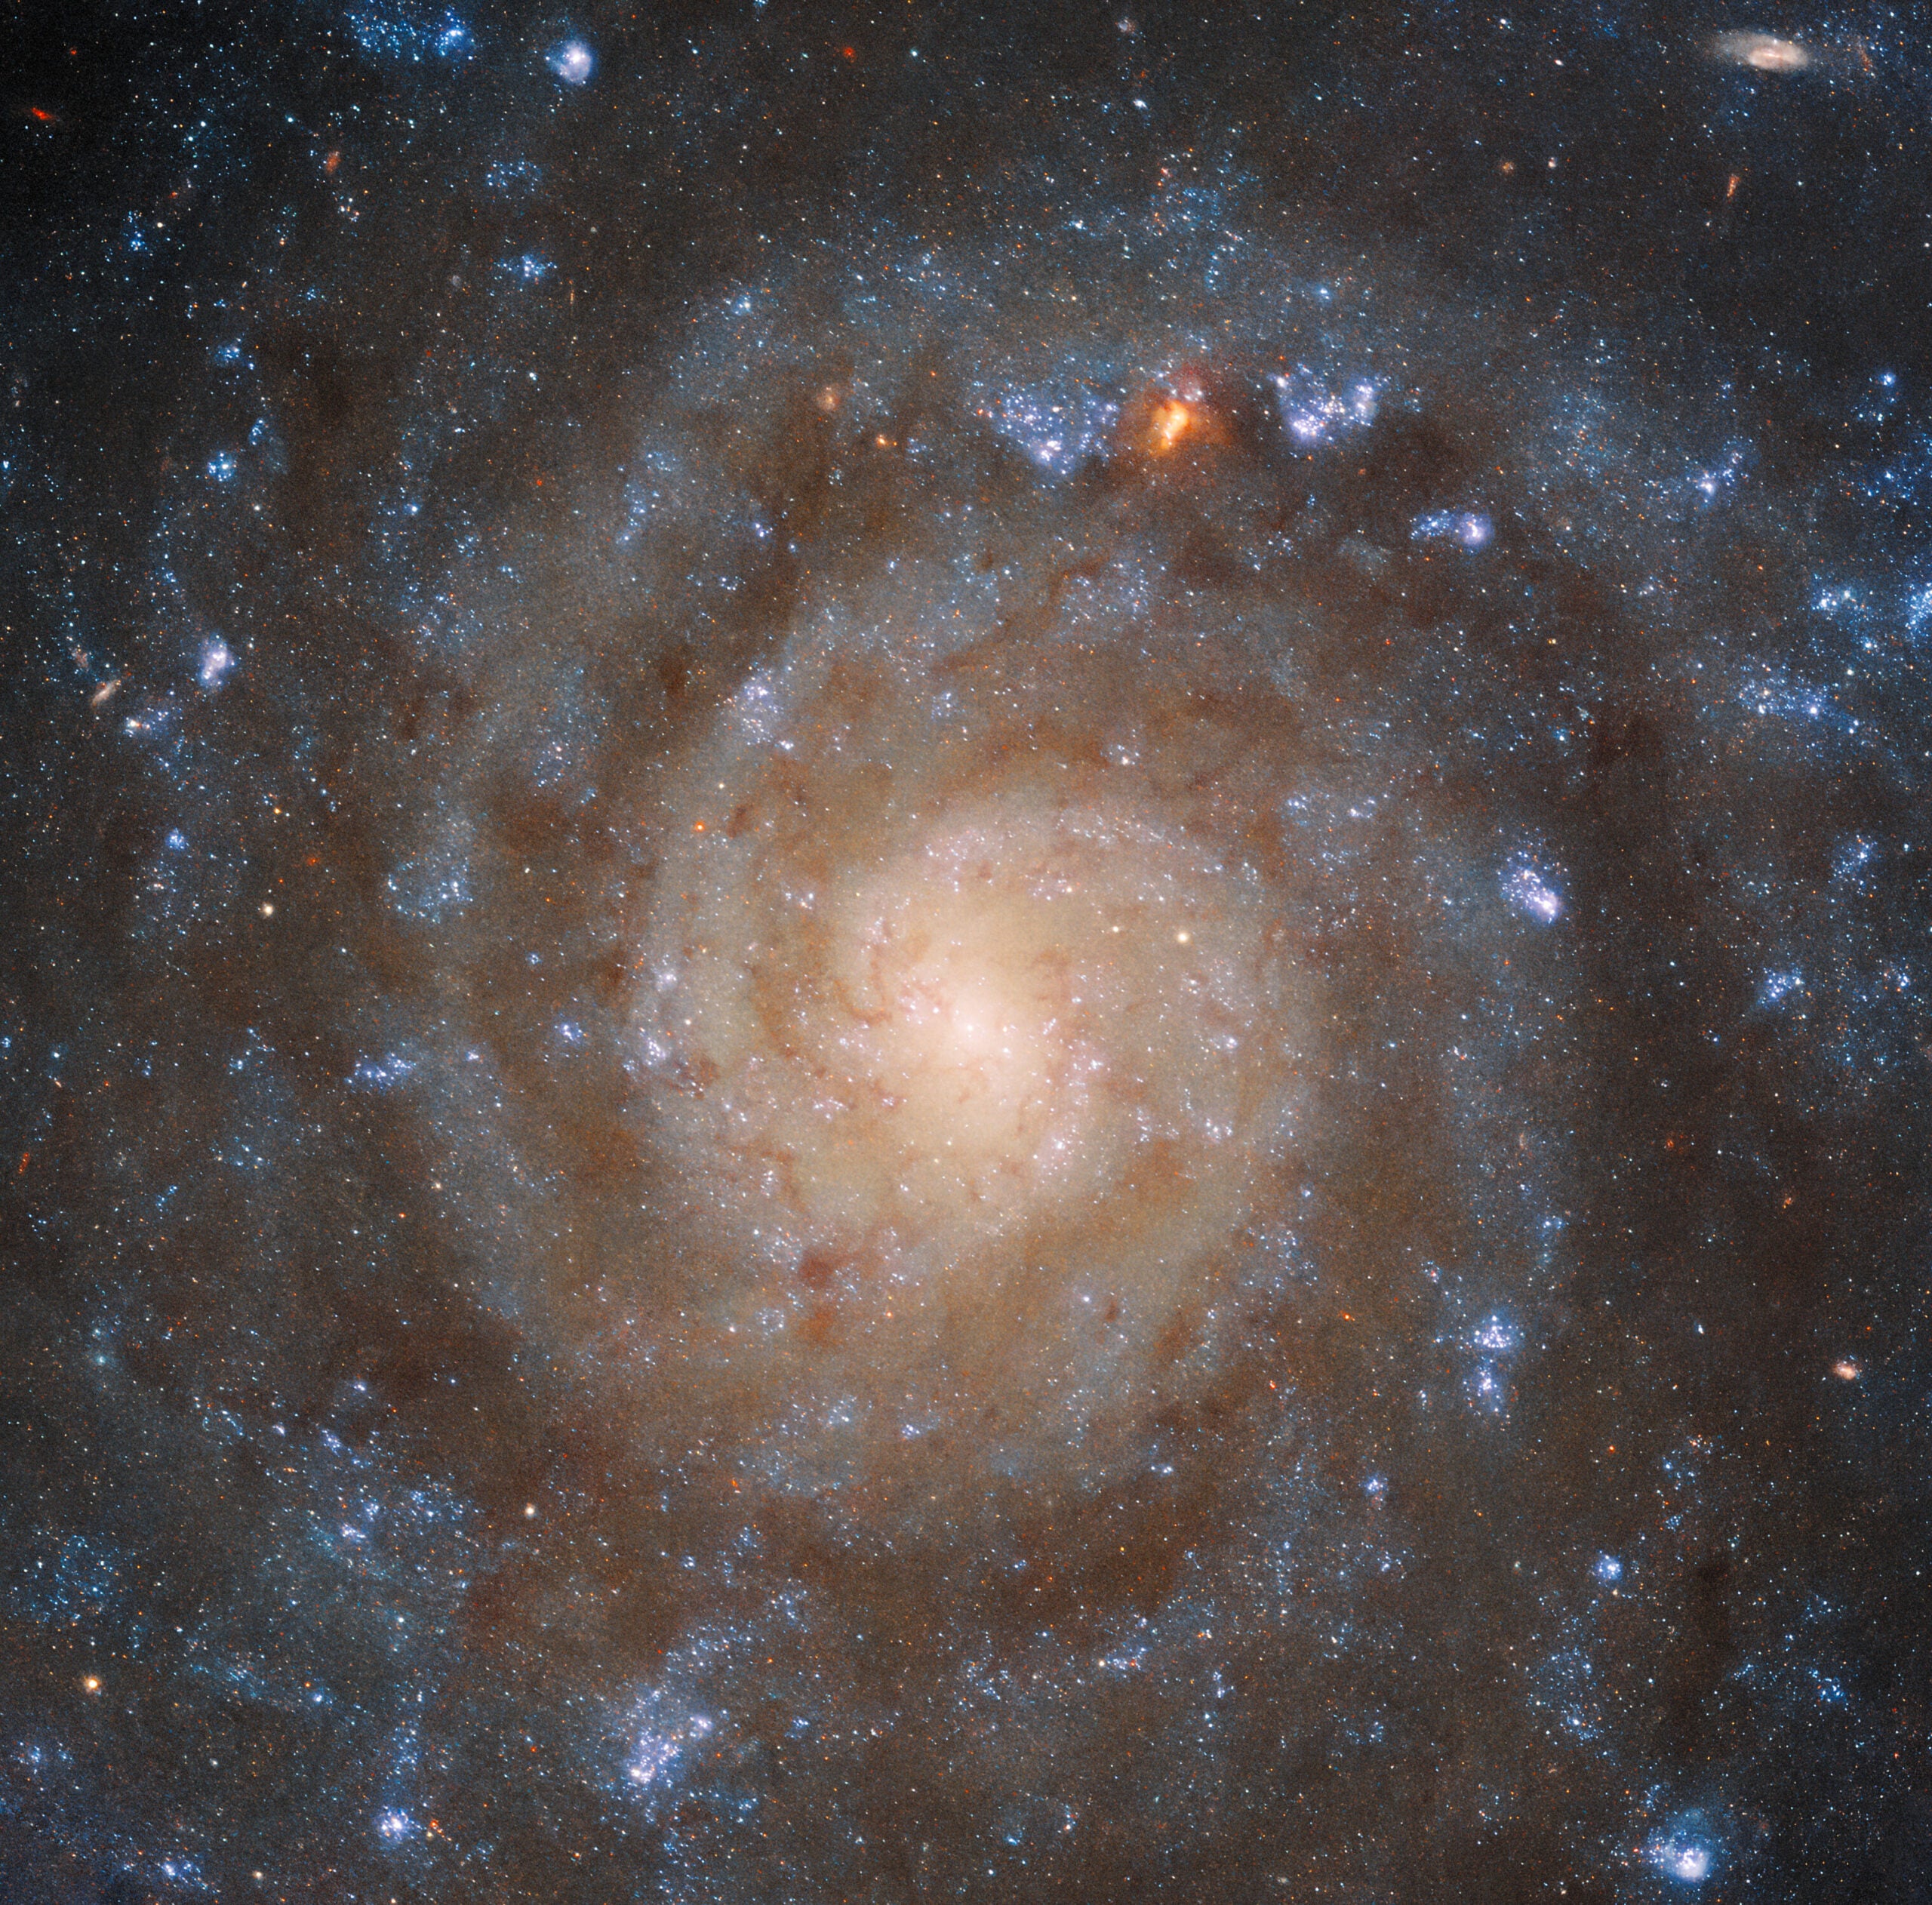 The winding spiral structure of the galaxy IC 5332 is portrayed in amazing detail by this image from the NASA/ESA Hubble Space Telescope. The clarity of Hubble’s Wide Field Camera 3 (WFC3) separates the arms of the galaxy from dark patches of dust in between, which block out the ultraviolet and visible light Hubble is sensitive to. Younger and older stars can be differentiated by their colours, showing how they are distributed throughout the galaxy. Meanwhile, Webb’s MIRI image provides a very different view, instead highlighting the patterns of gas spread throughout the galaxy.